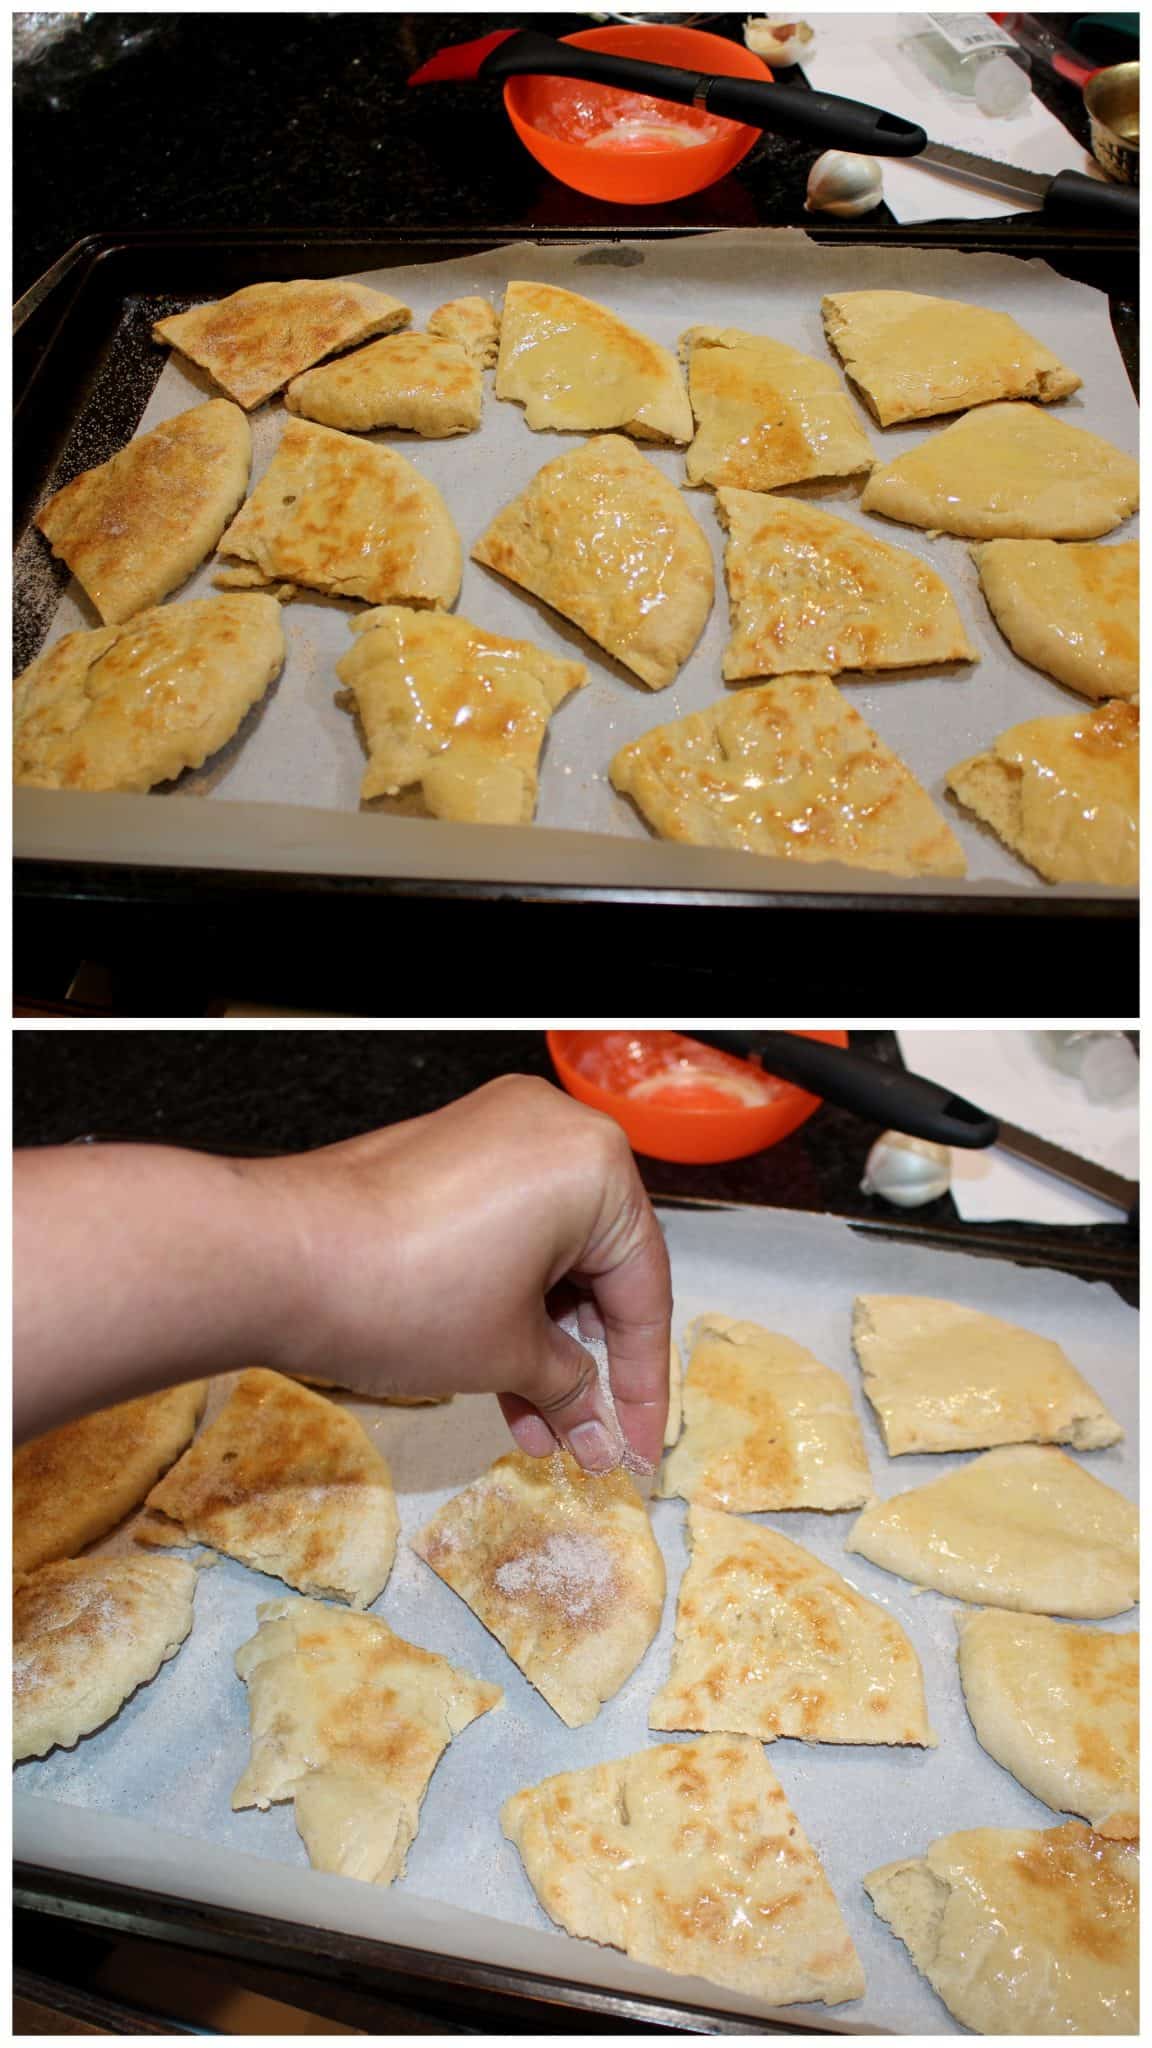 Cut Pita bread into pieces and getting prepped to bake.